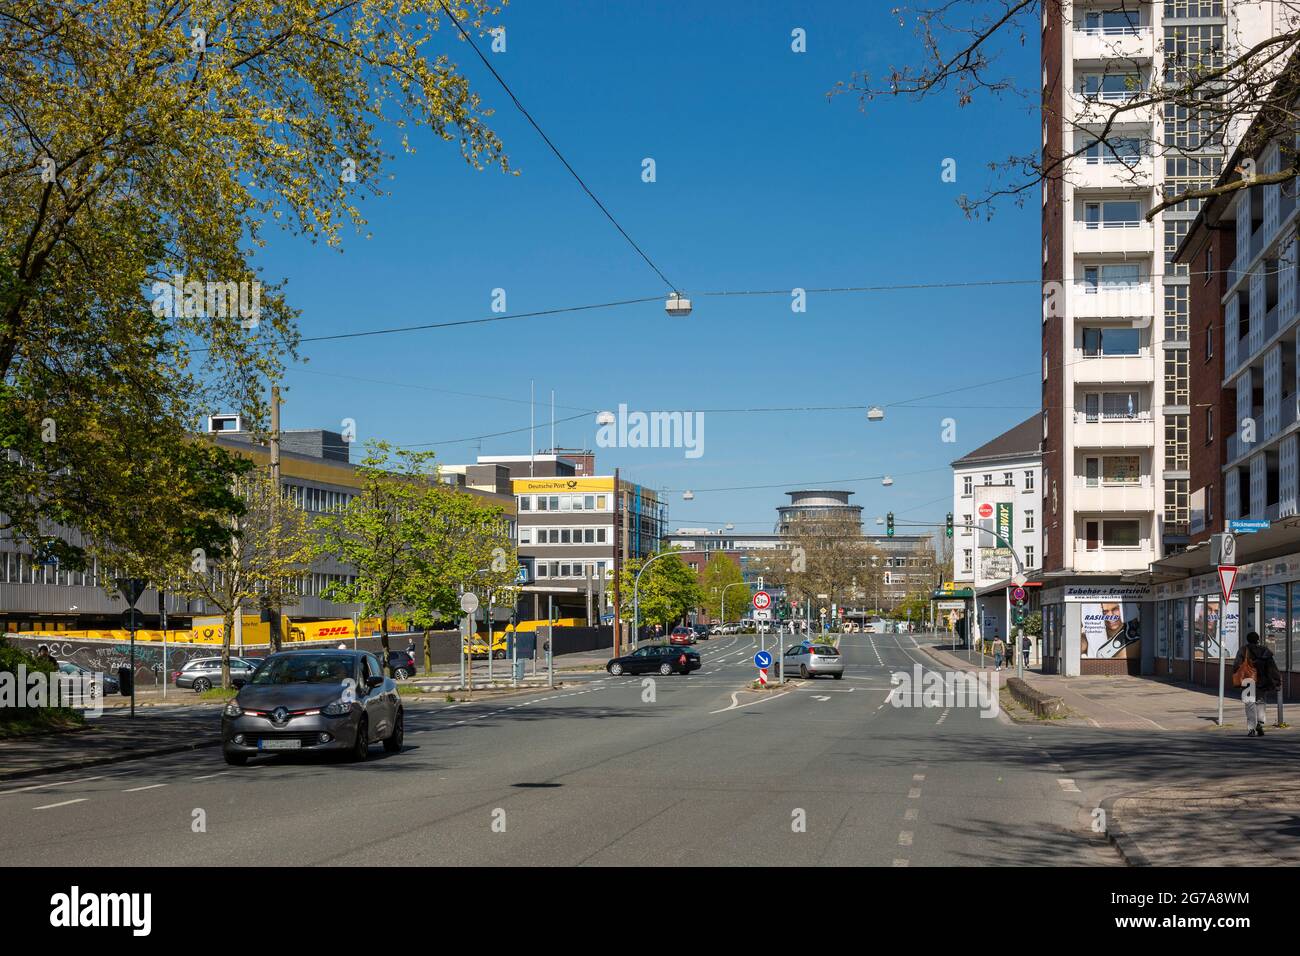 Germany, Oberhausen, Alt-Oberhausen, Ruhr area, Lower Rhine, Rhineland, North Rhine-Westphalia, NRW, view along Friedrich-Karl-Strasse towards Deutsche Post and the main train station and to the Oberhausen Labor Court, cars on the main road Stock Photo